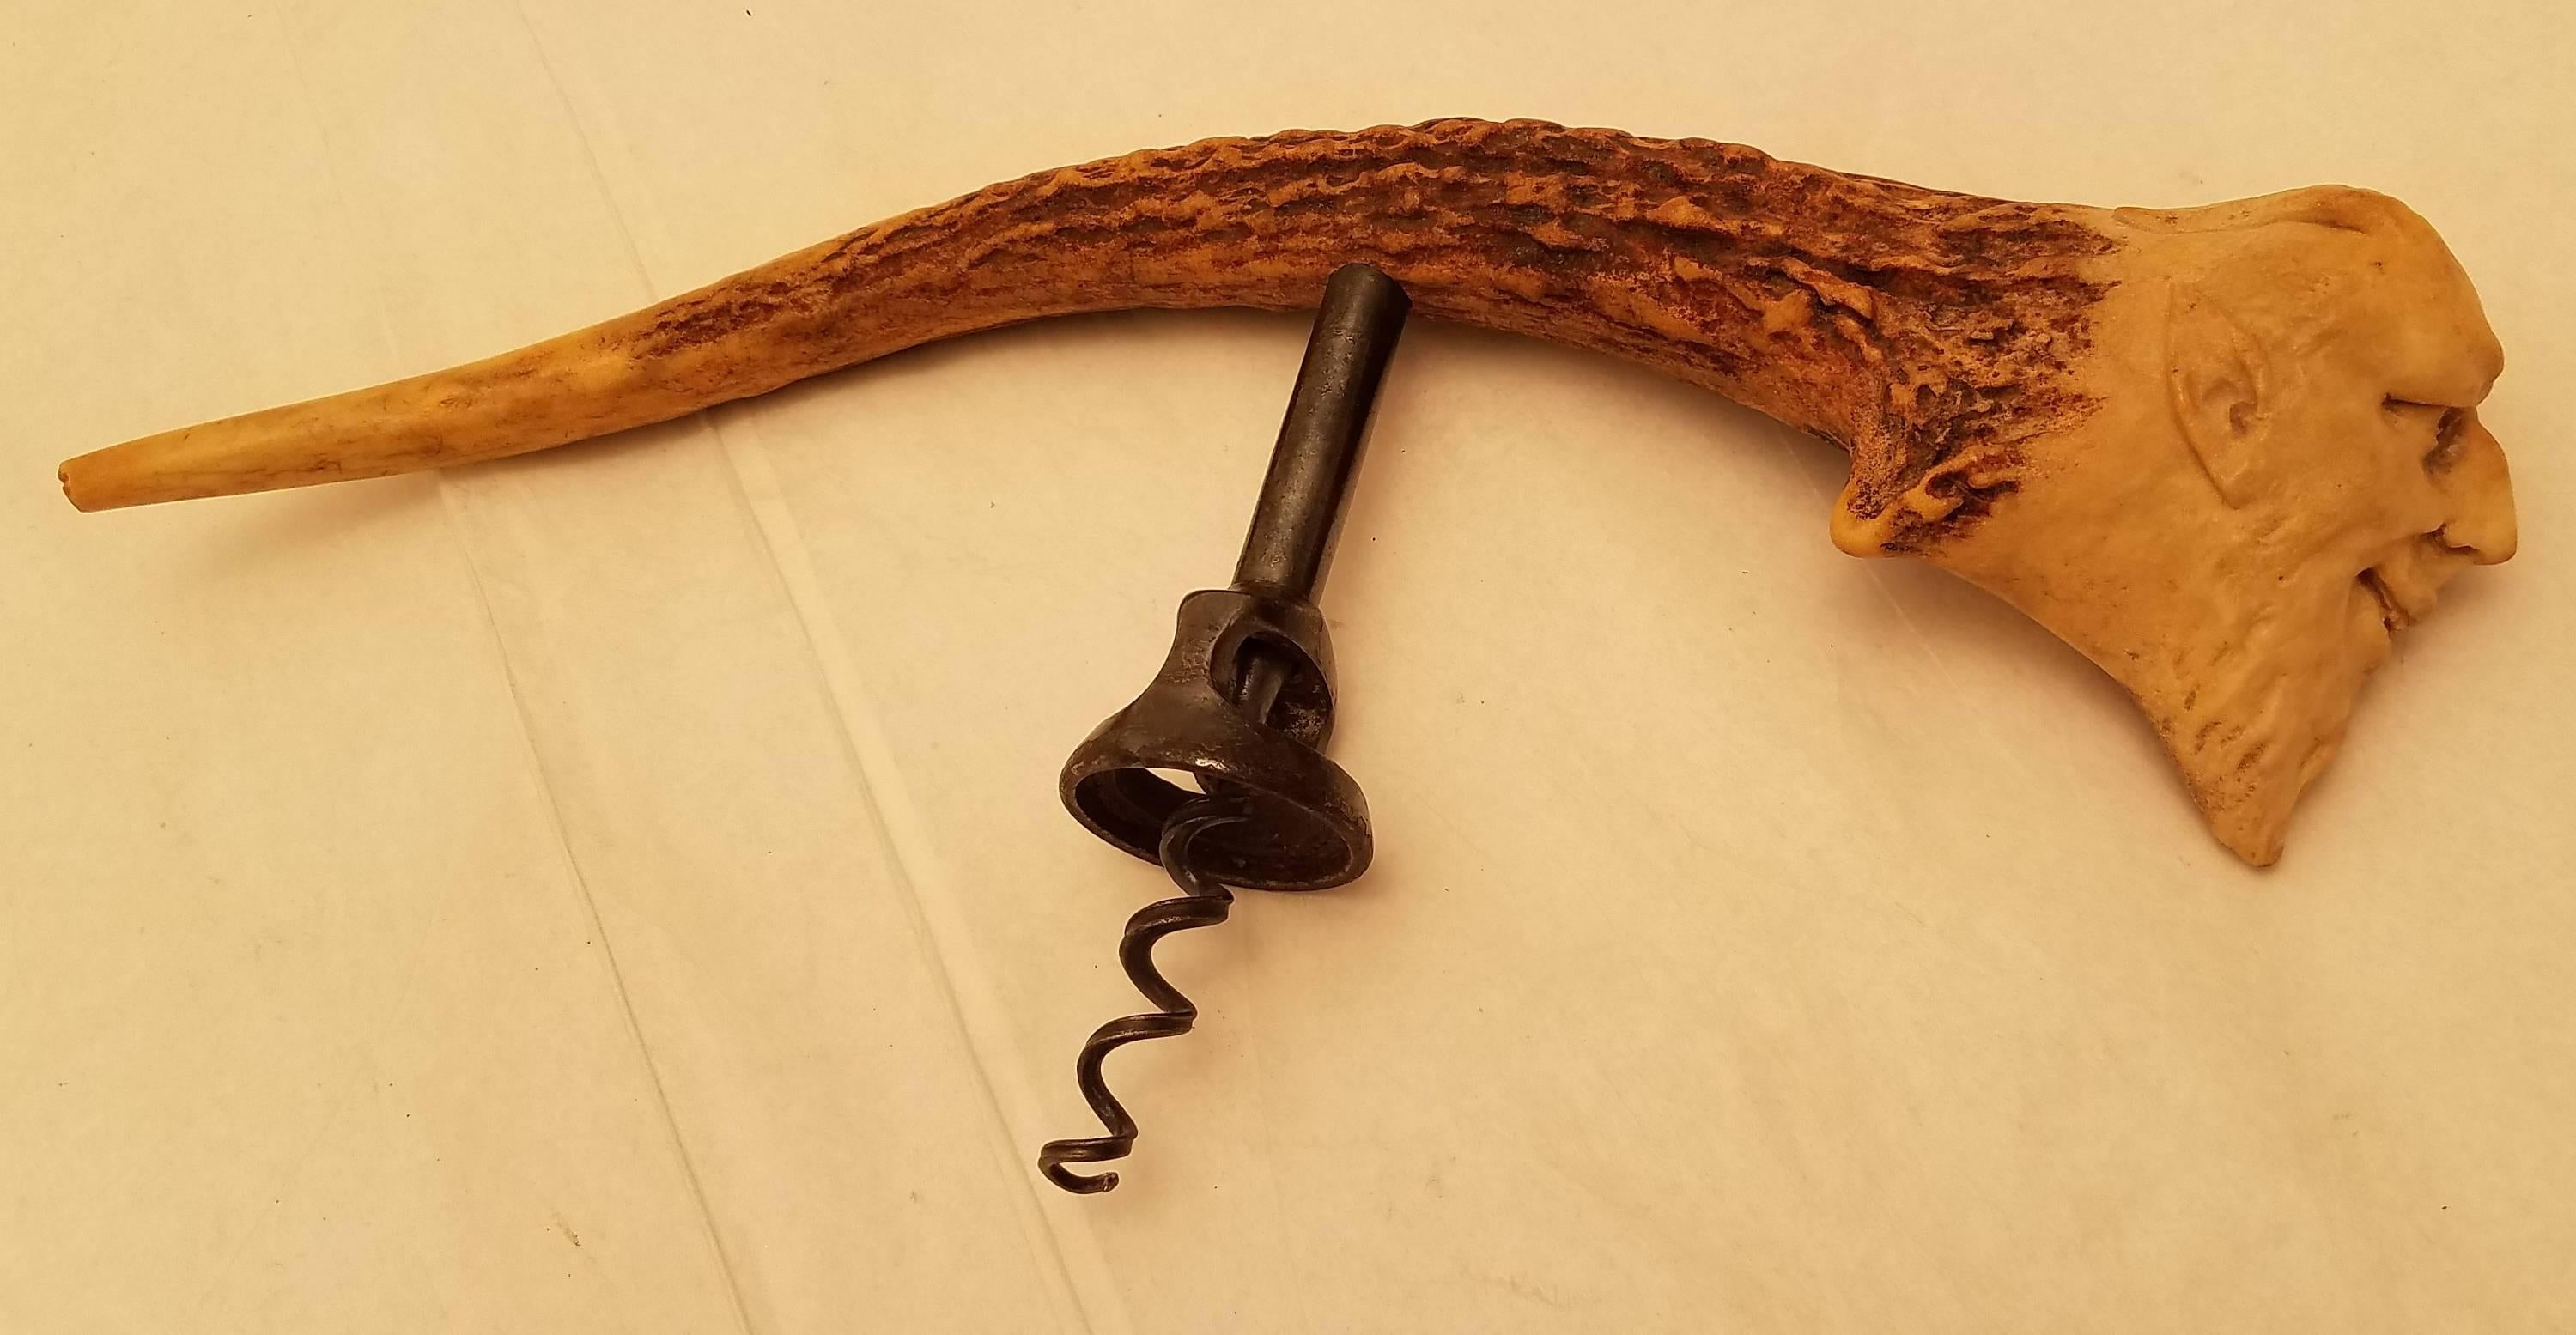 A rare and whimsical carved horn corkscrew with intricate novelty carvings of a man's face and designs. Measuring 9.7 inches long.

We hand polish all items before shipping them out, but if there is interest for a professional polishing and/or